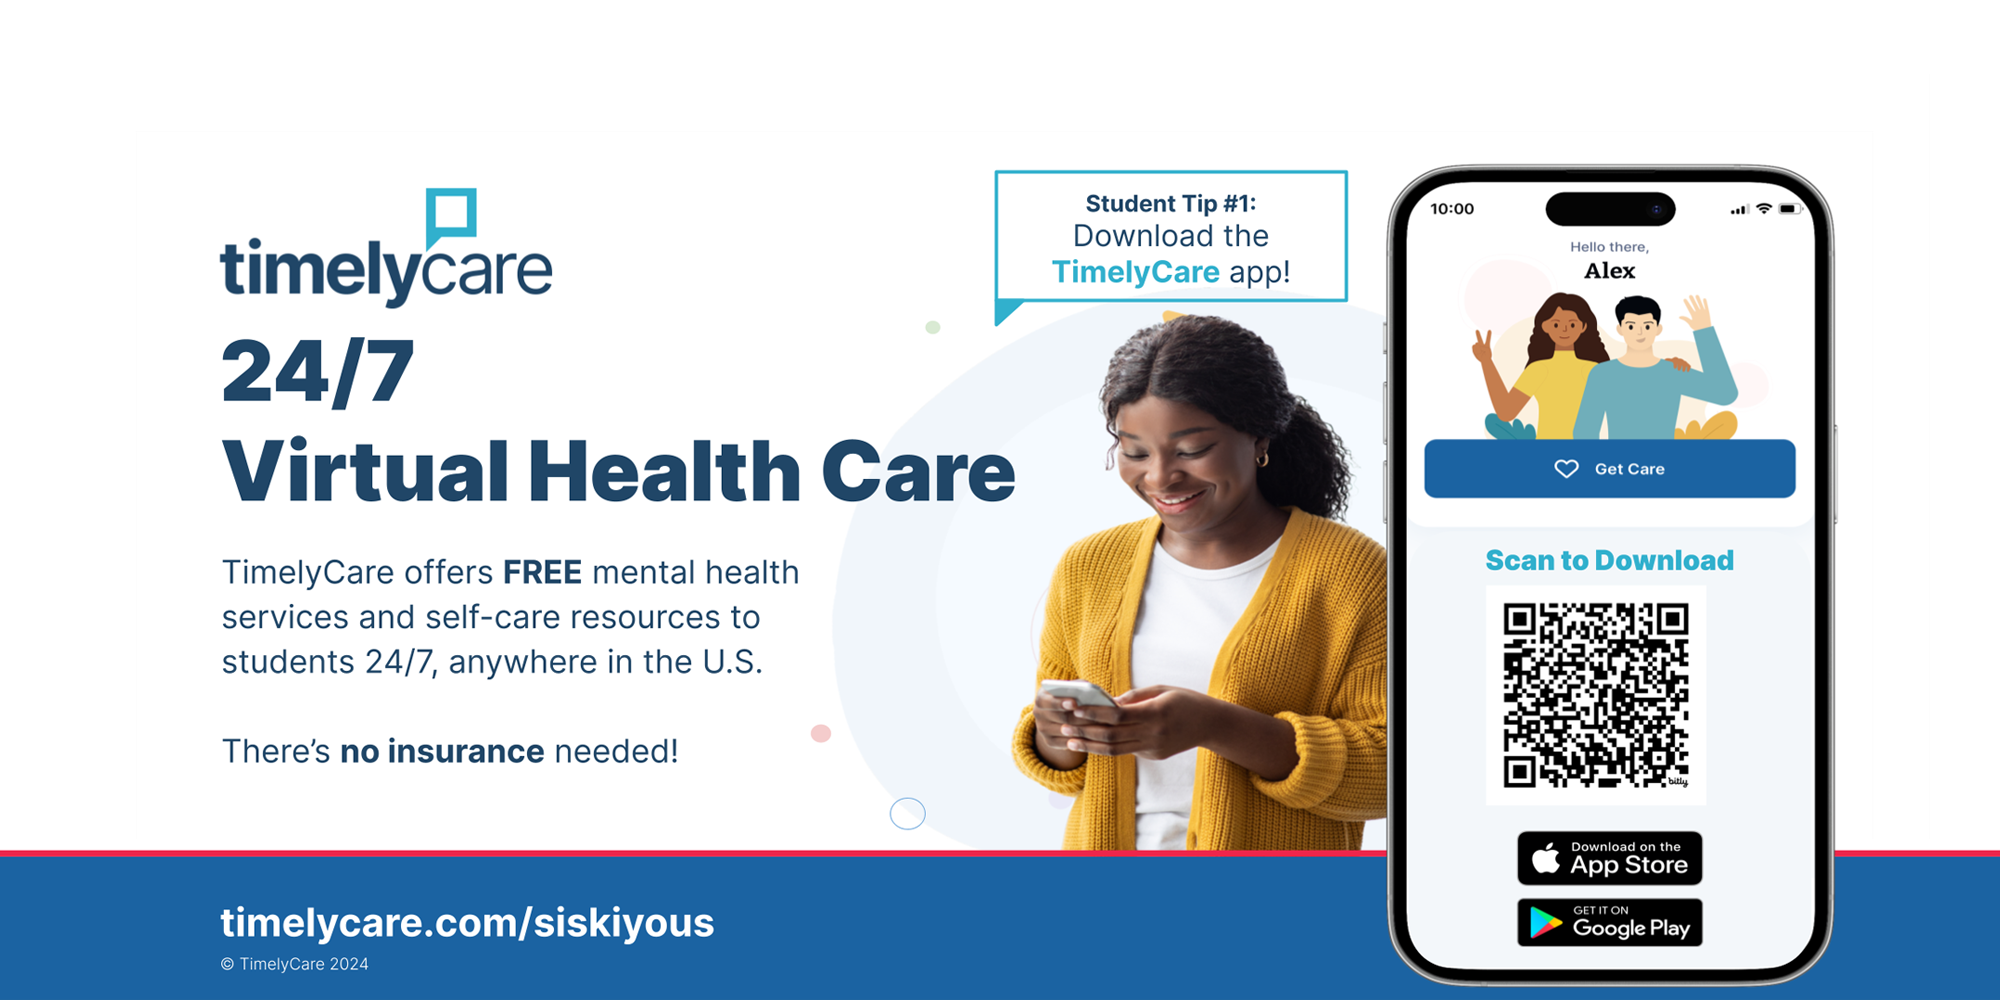 TimelyCare 24/7. Virtual Healthcare. TimelyCare offers free mental health services and self-care resources to students 24/7, anywhere in the US. There's no insurance needed.